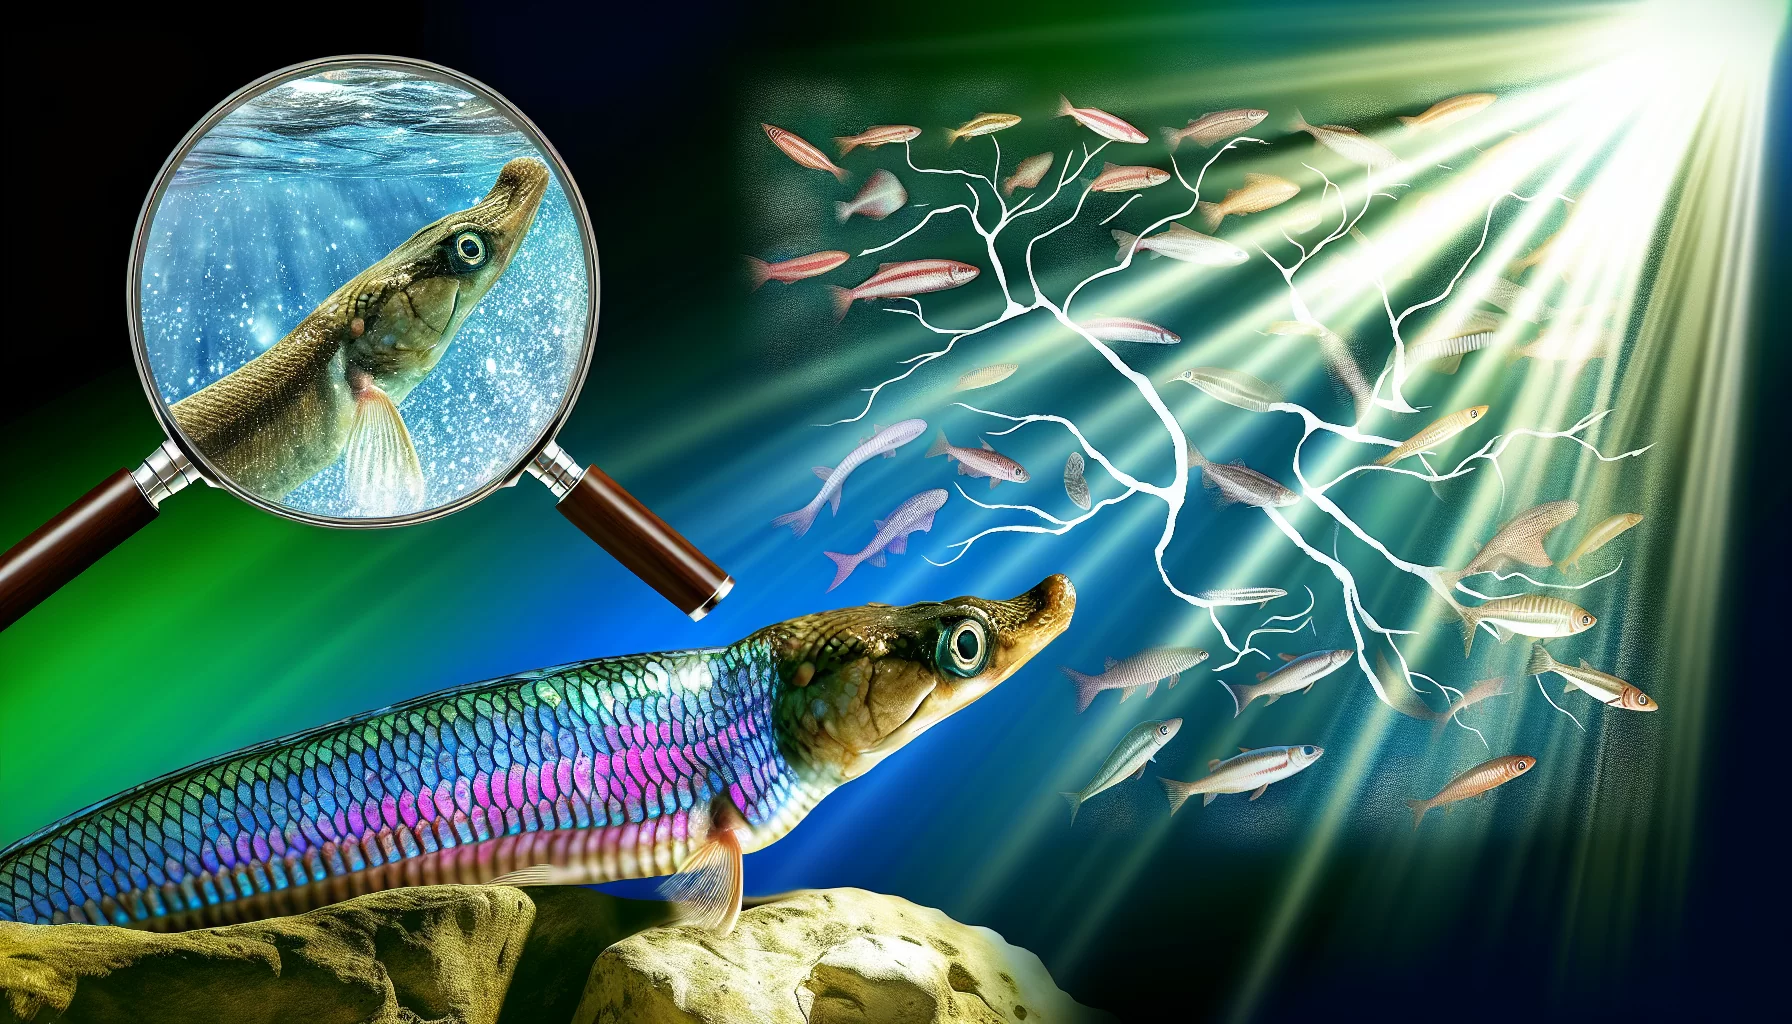 Remarkable discovery of snake-headed fish unravels mysteries of animal evolution